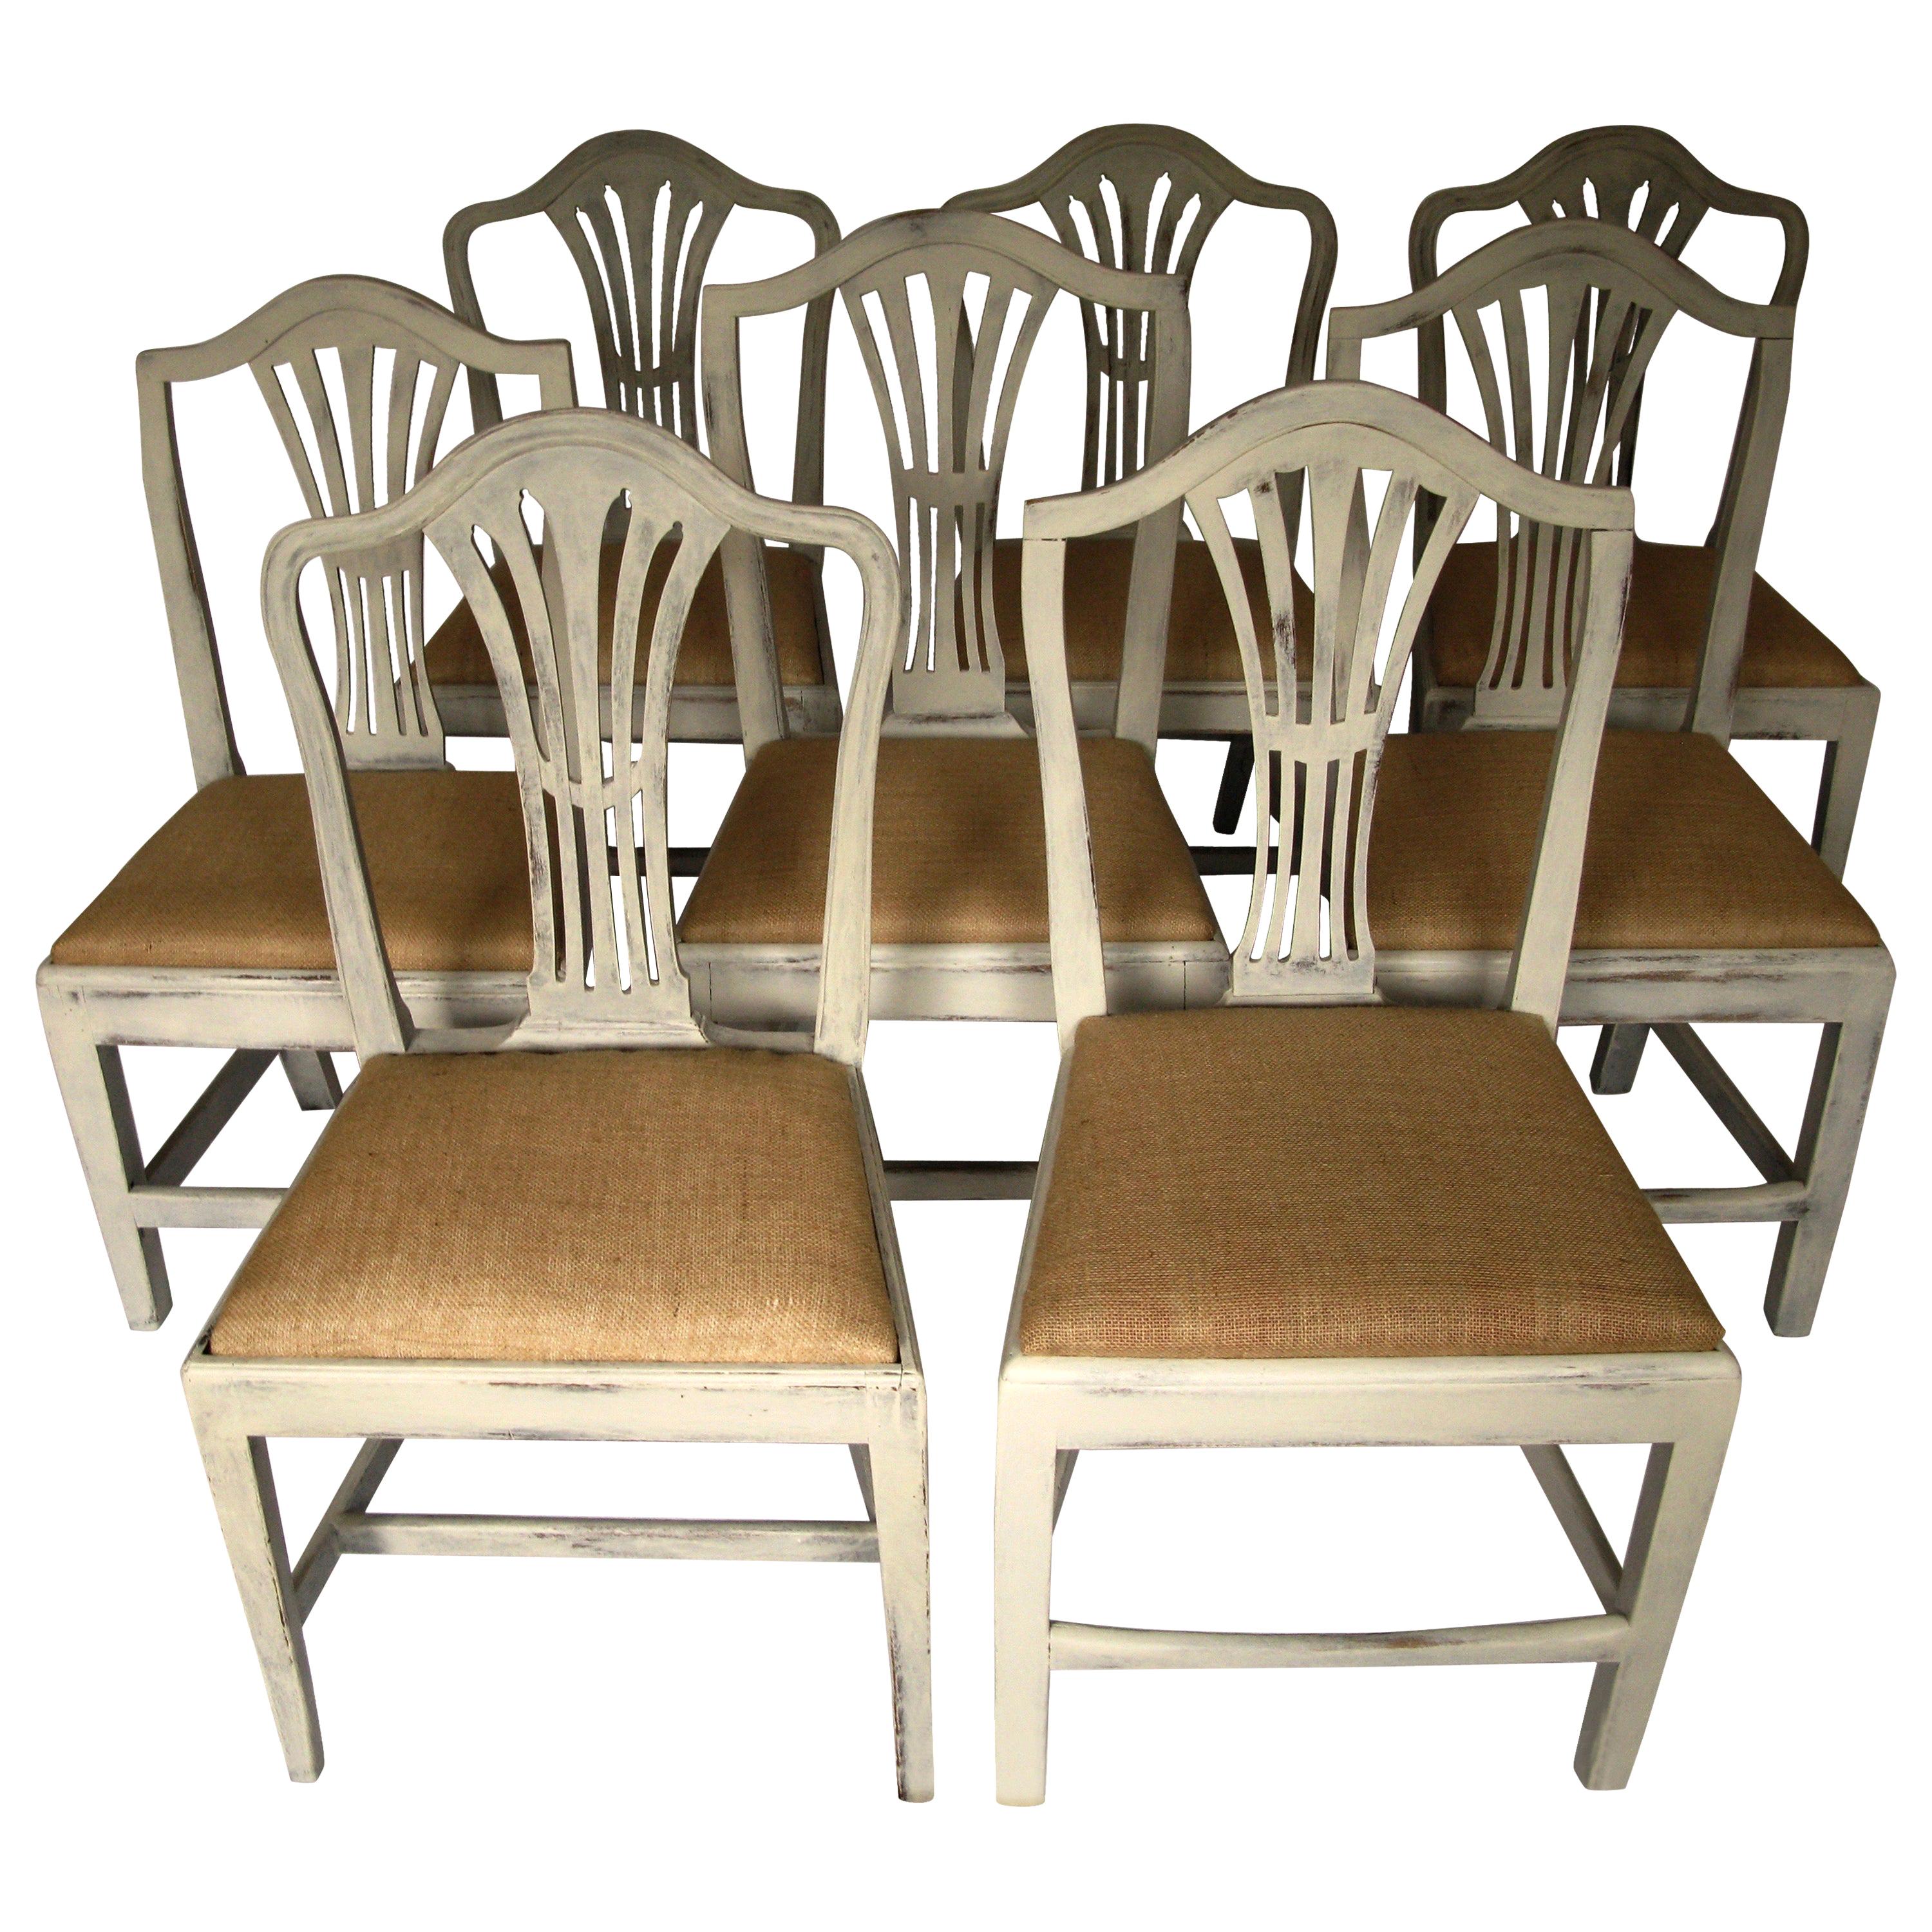 Harlequin Set of 8 Antique Chairs, Early 19th Century, England, Decorative